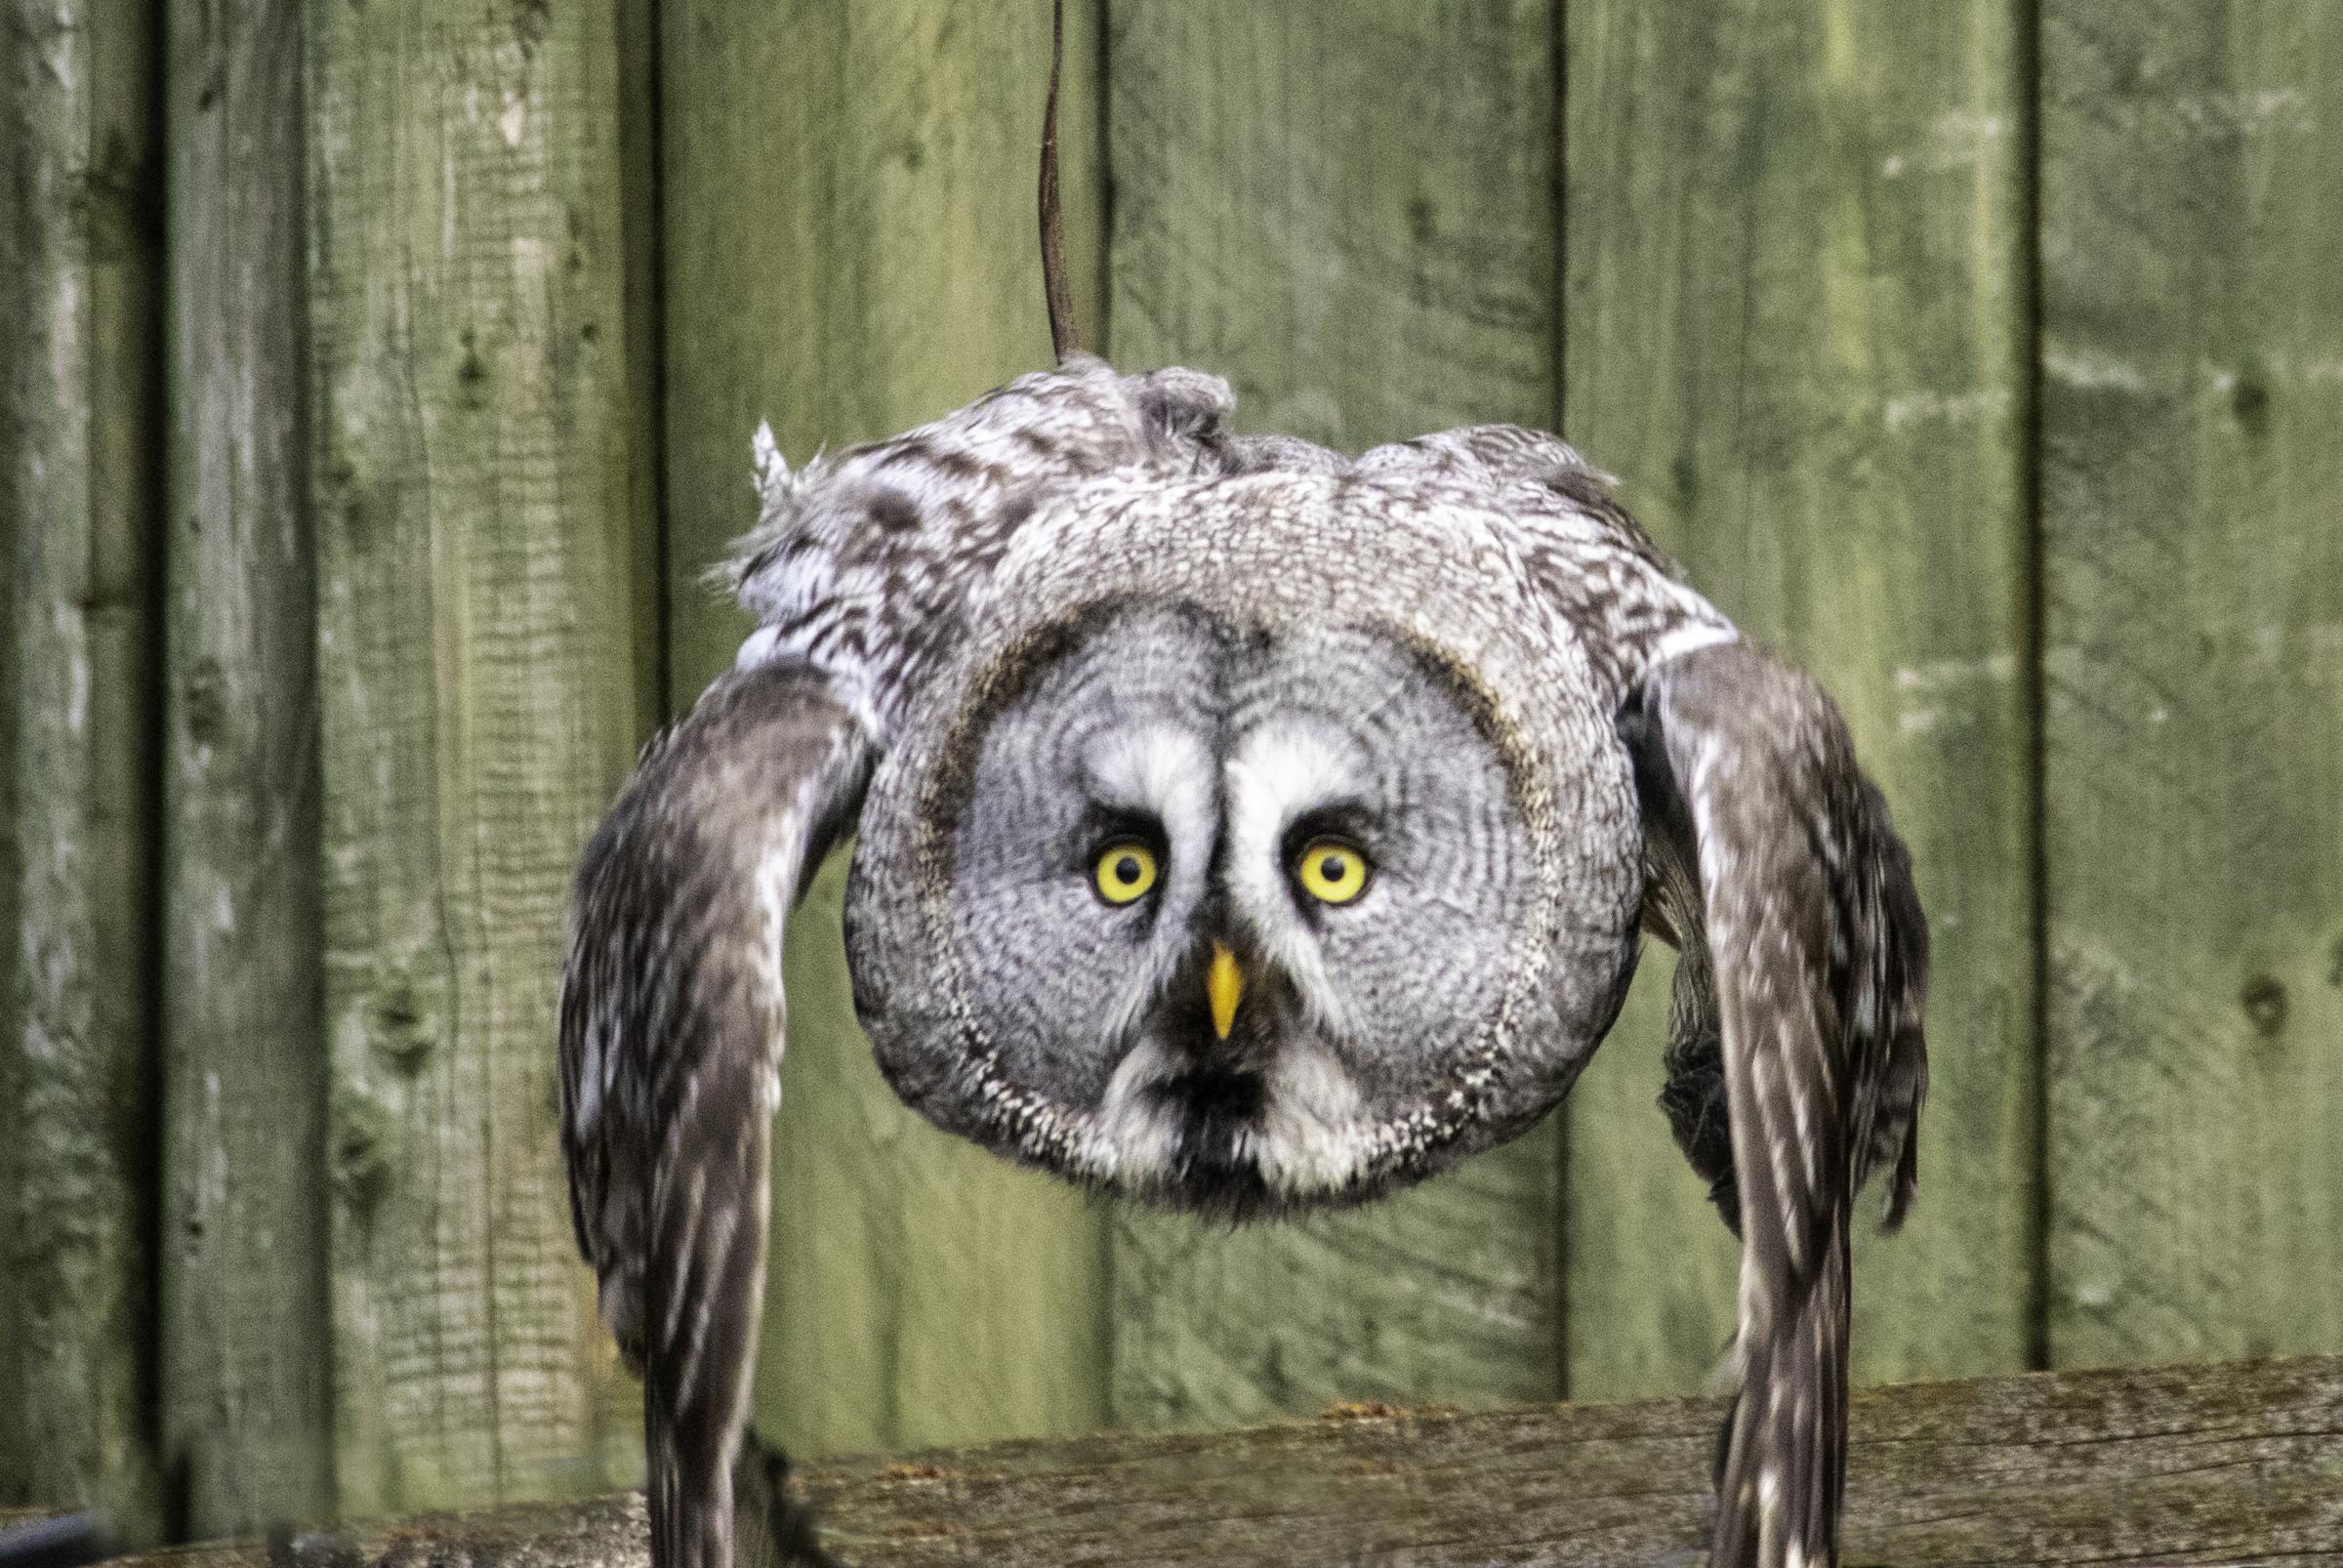 An owl at Gauntlet Birds of Prey by Ann ODonnell